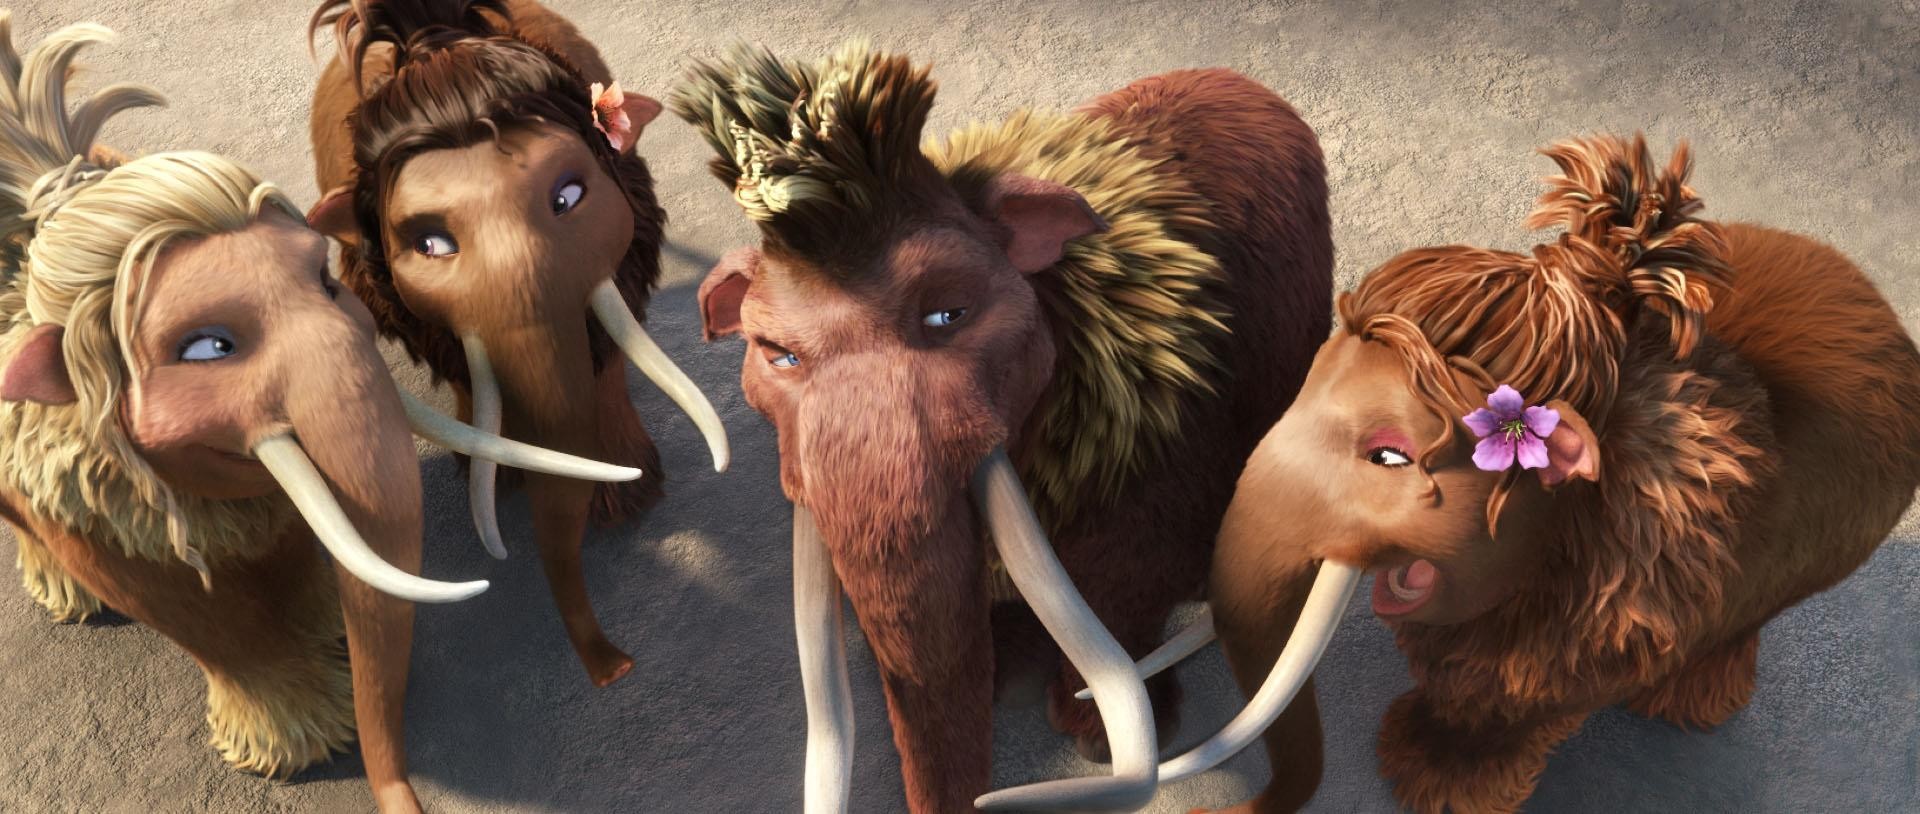 Steffie, Ethan and Katie from 20th Century Fox's Ice Age: Continental Drift (2012)